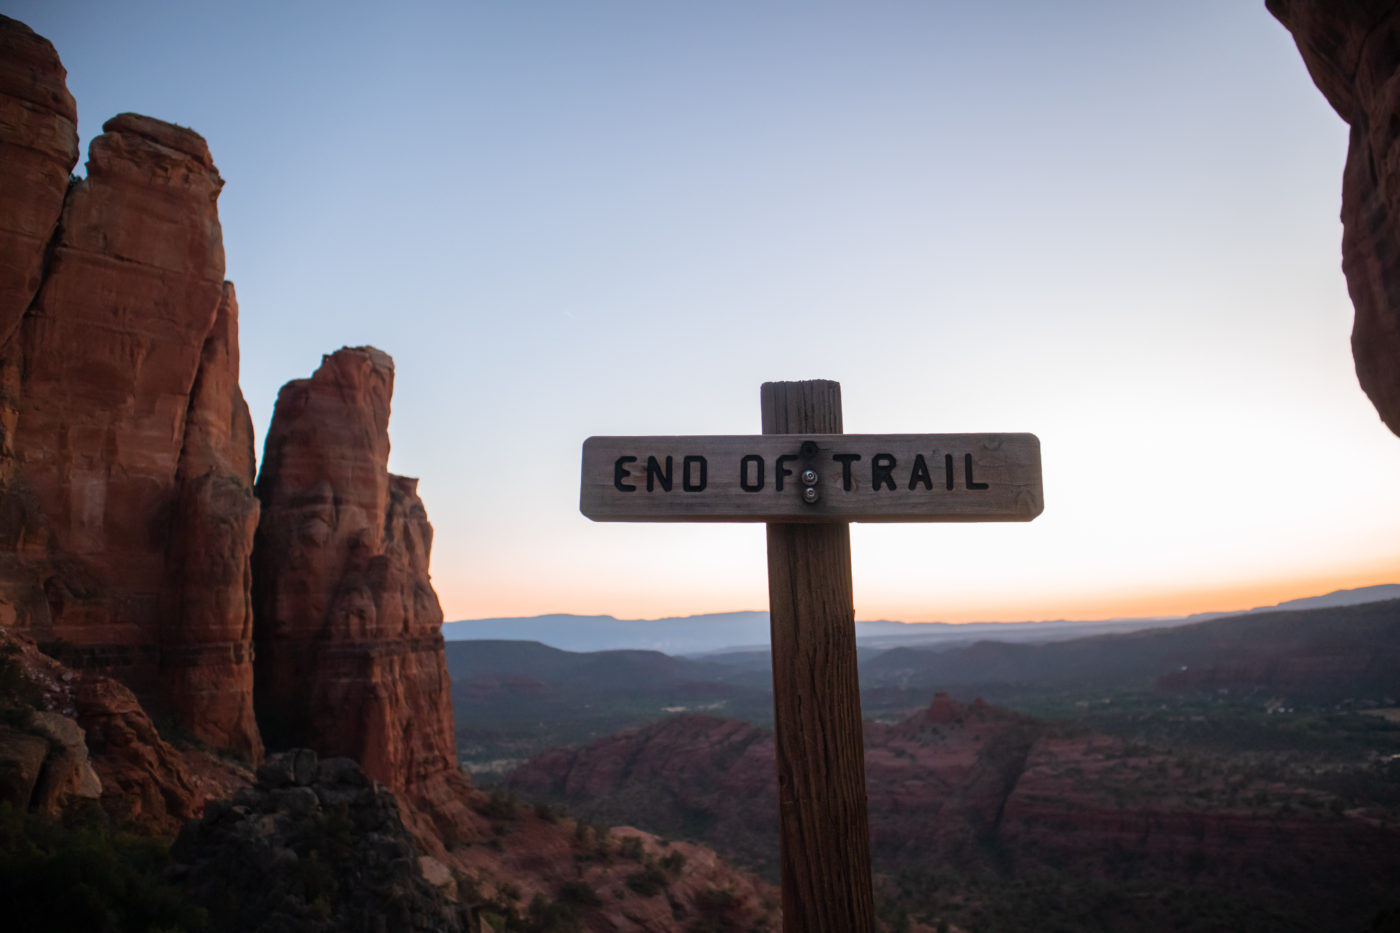 Arizona Campervan Rental - Plan the best Arizona road trip with this great Arizona itinerary! - Sedona - The Grand Canyon - Page - Monument Valley